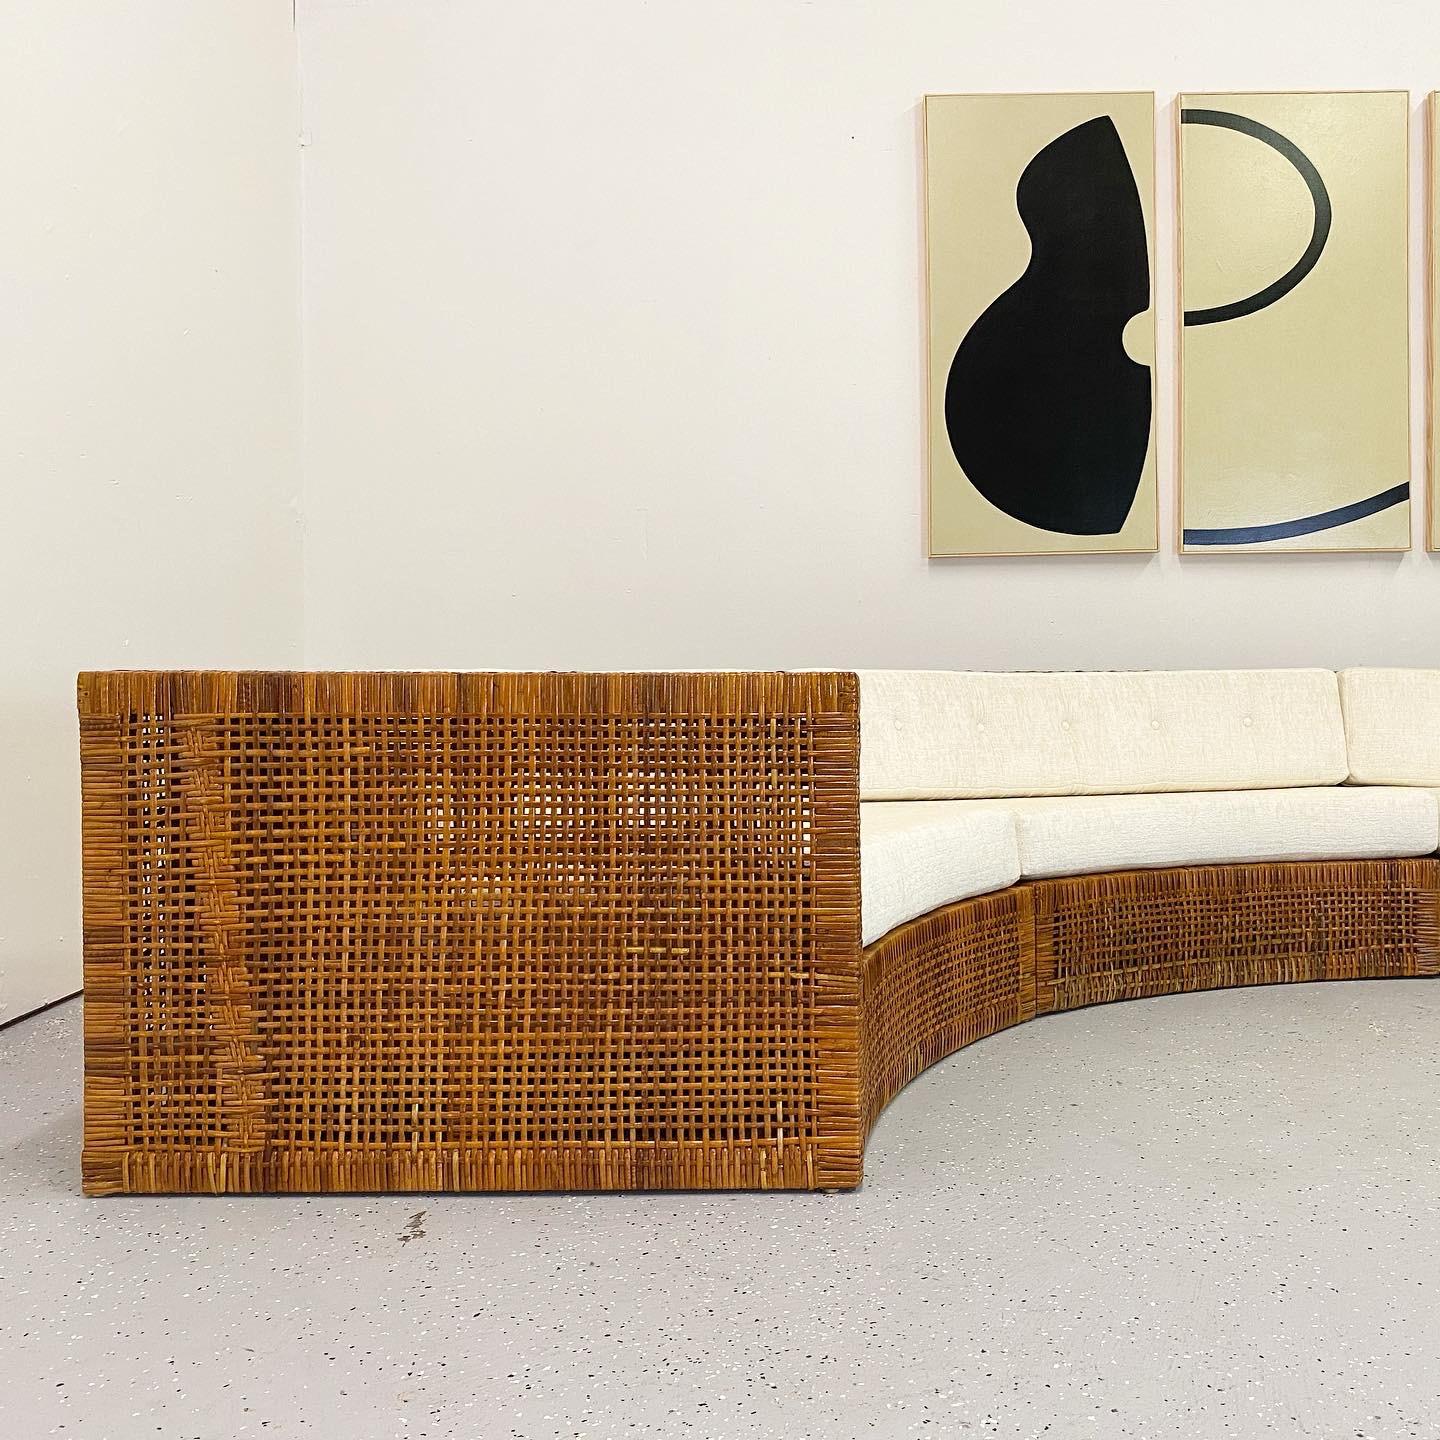 An exceptional and rare four-piece sofa designed by Danny Ho Fong for Tropi-Cal. This is the only example of this sofa on the market. Beautiful woven rattan over mahogany frame. Massive in scale at fourteen feet across.